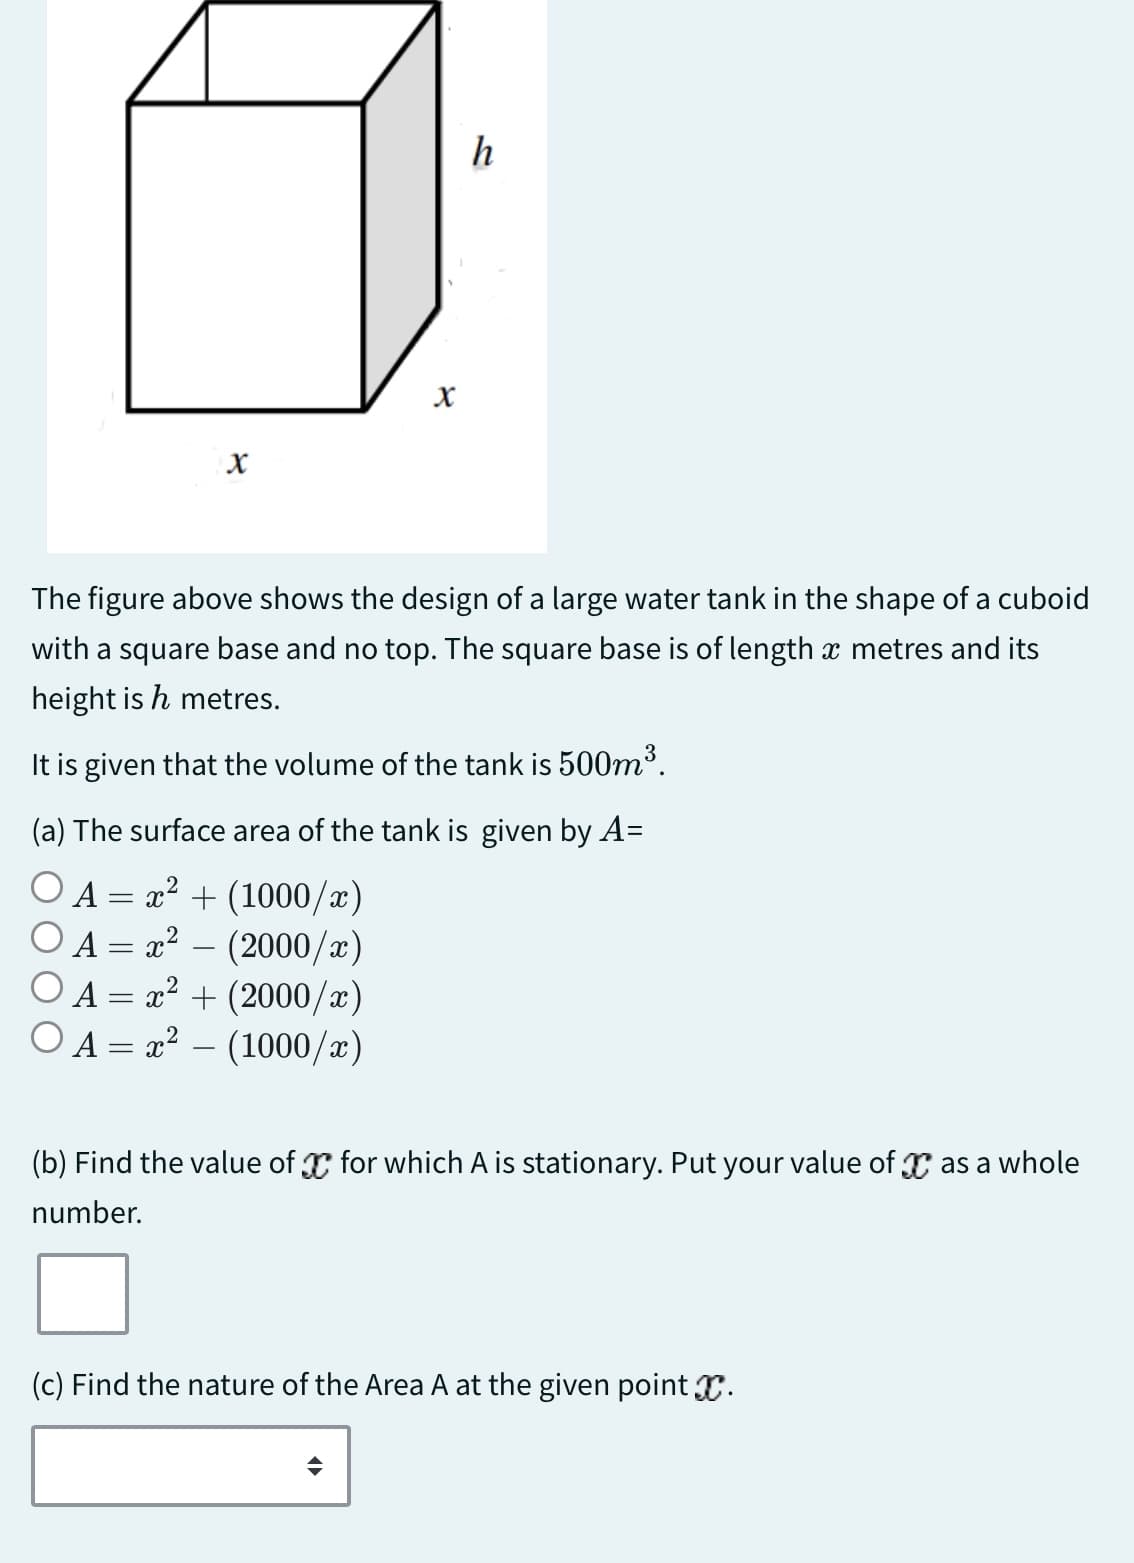 x
x
h
The figure above shows the design of a large water tank in the shape of a cuboid
with a square base and no top. The square base is of length x metres and its
height is h metres.
It is given that the volume of the tank is 500m³.
(a) The surface area of the tank is given by A=
A = x² + (1000/x)
A = x²
(2000/x)
A = x² + (2000/x)
A = x² - (1000/x)
(b) Find the value of x for which A is stationary. Put your value of x as a whole
number.
(c) Find the nature of the Area A at the given point X.